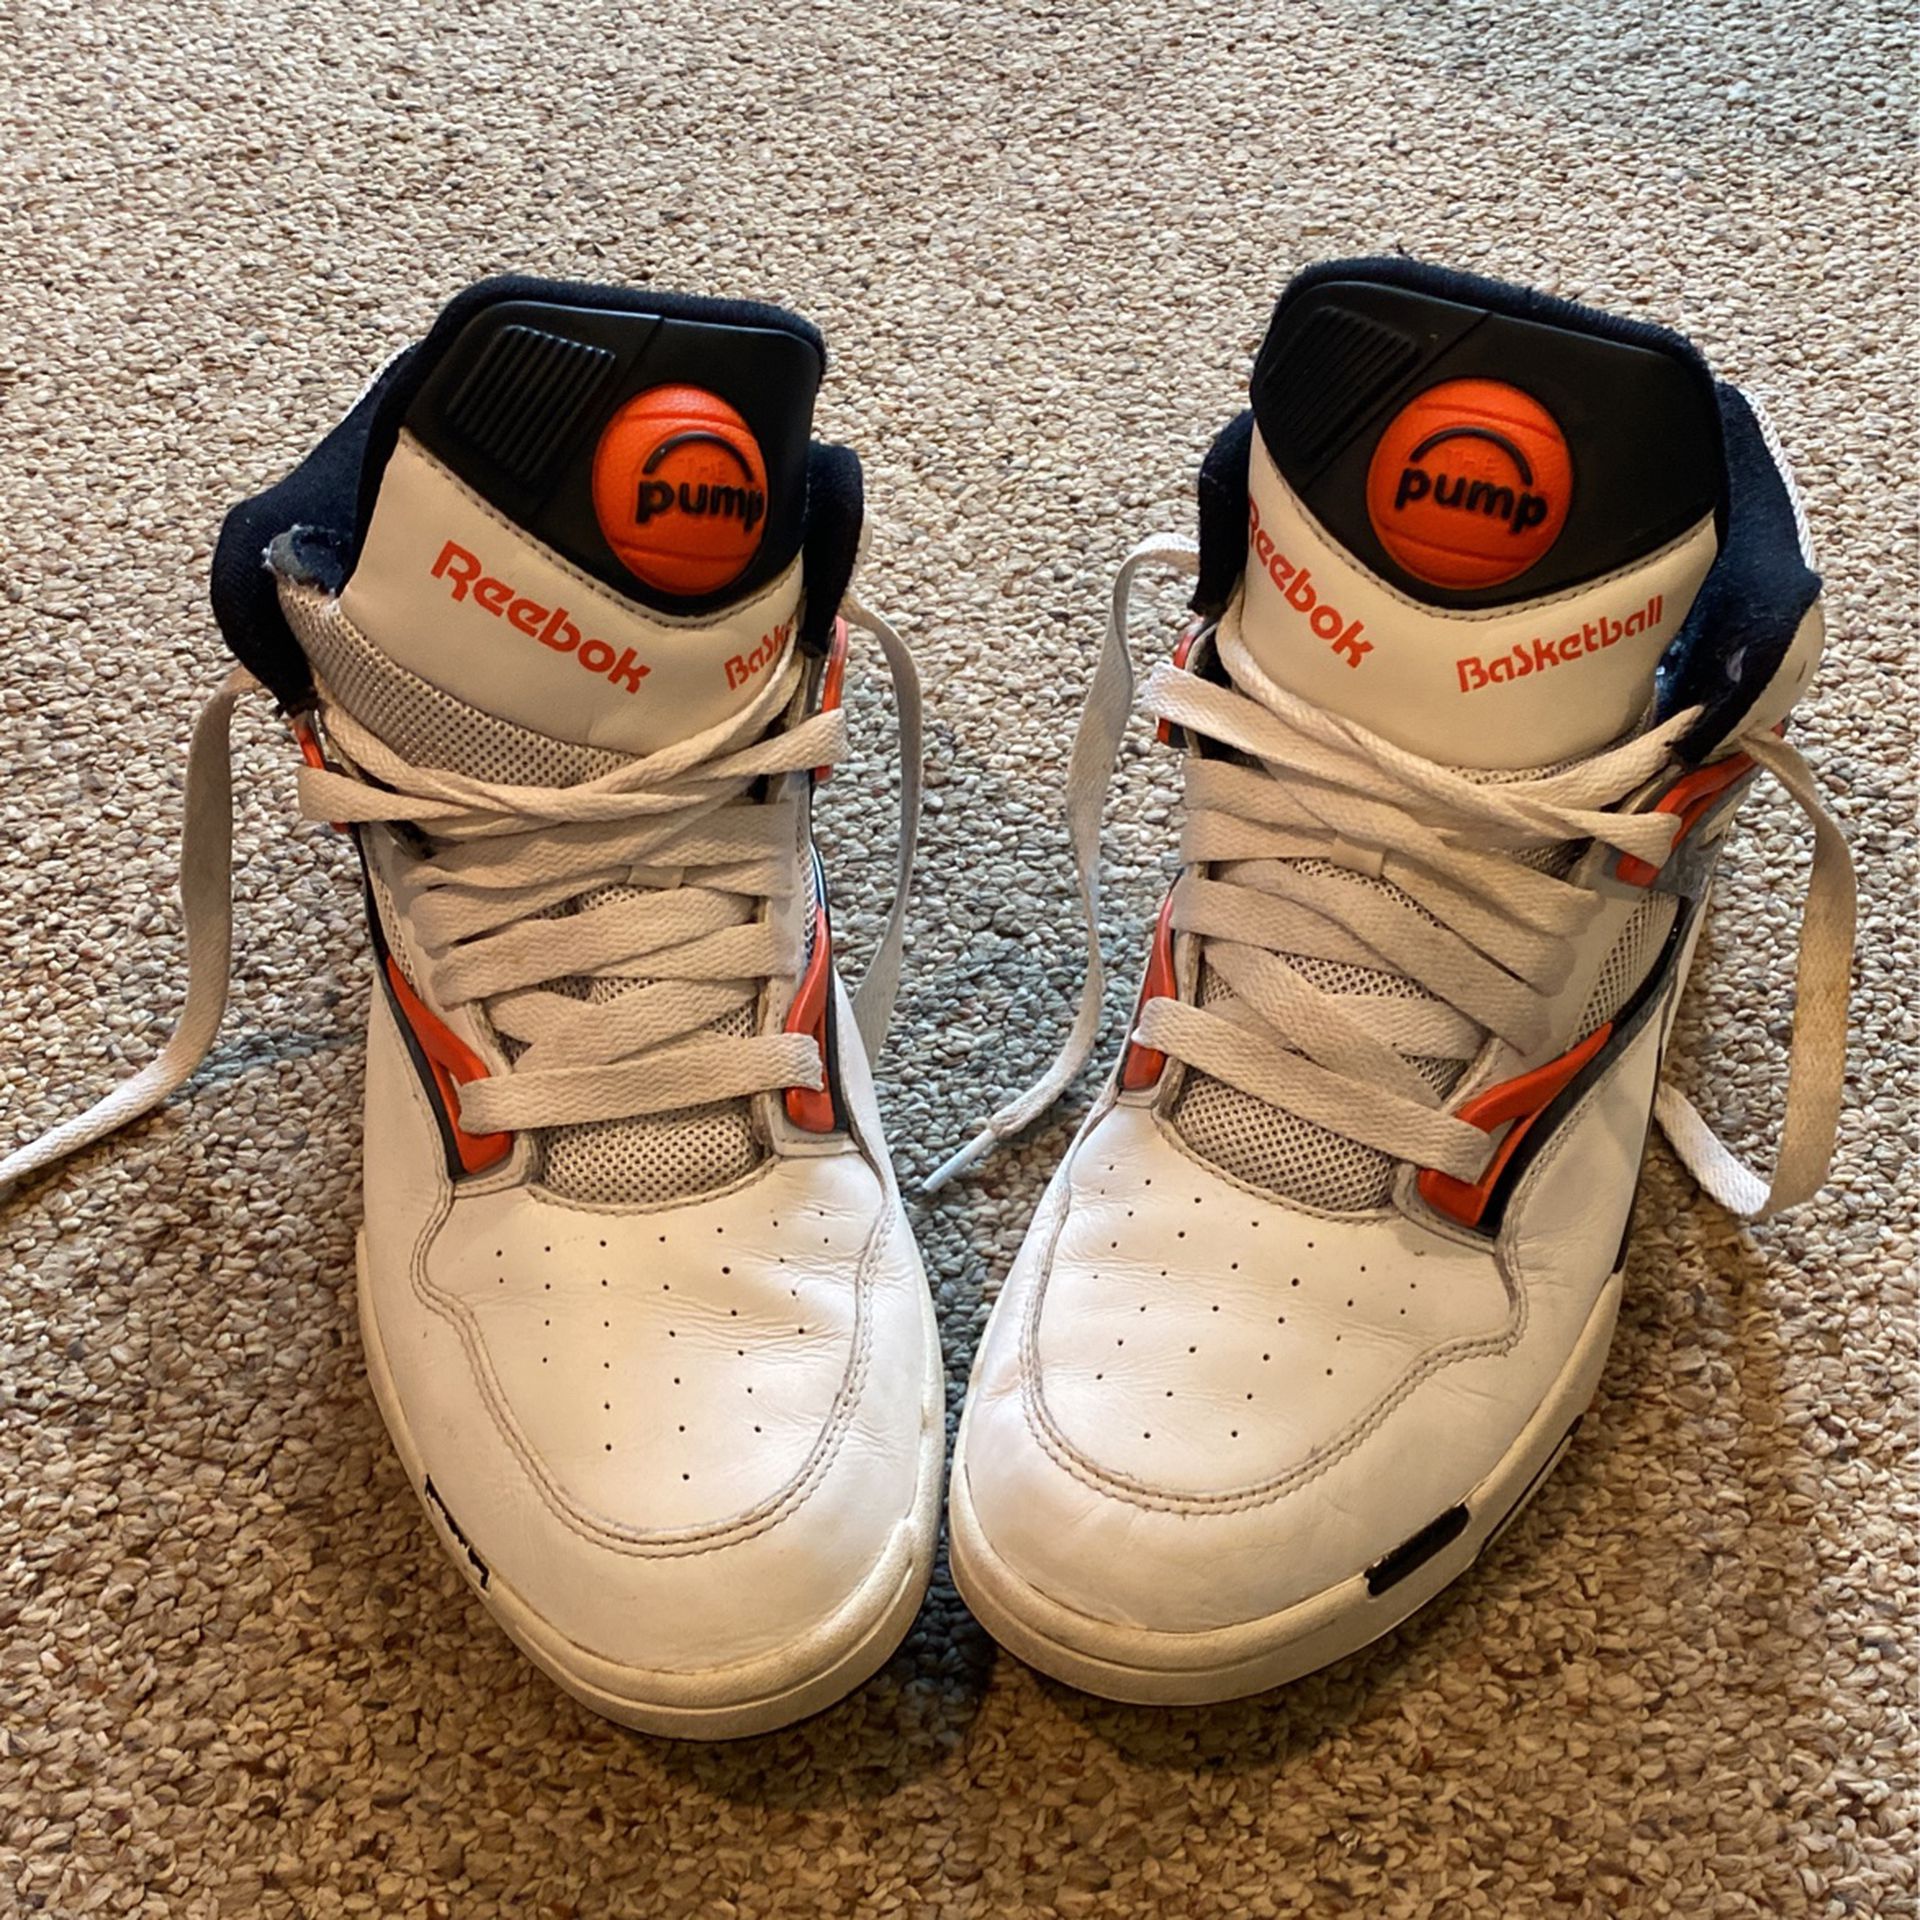 mor klamre sig Investere Reebok 'The Pump': Pumps Retro Basketball Shoes (Men's Size 9.5) for Sale  in Reading, MA - OfferUp